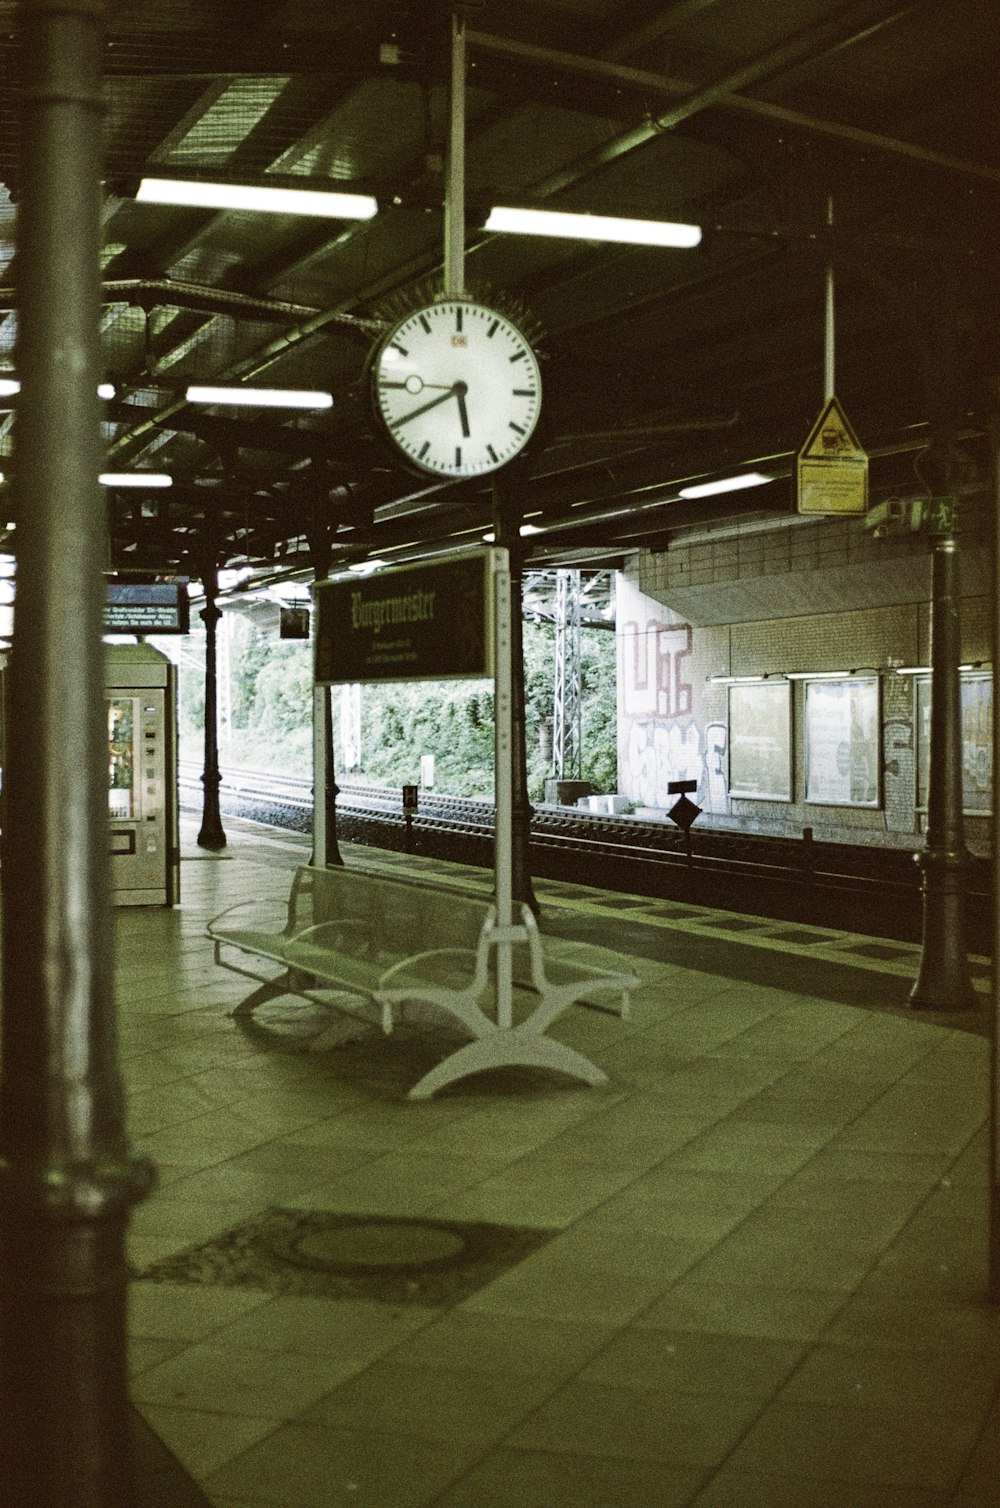 a clock on a pole in a train station